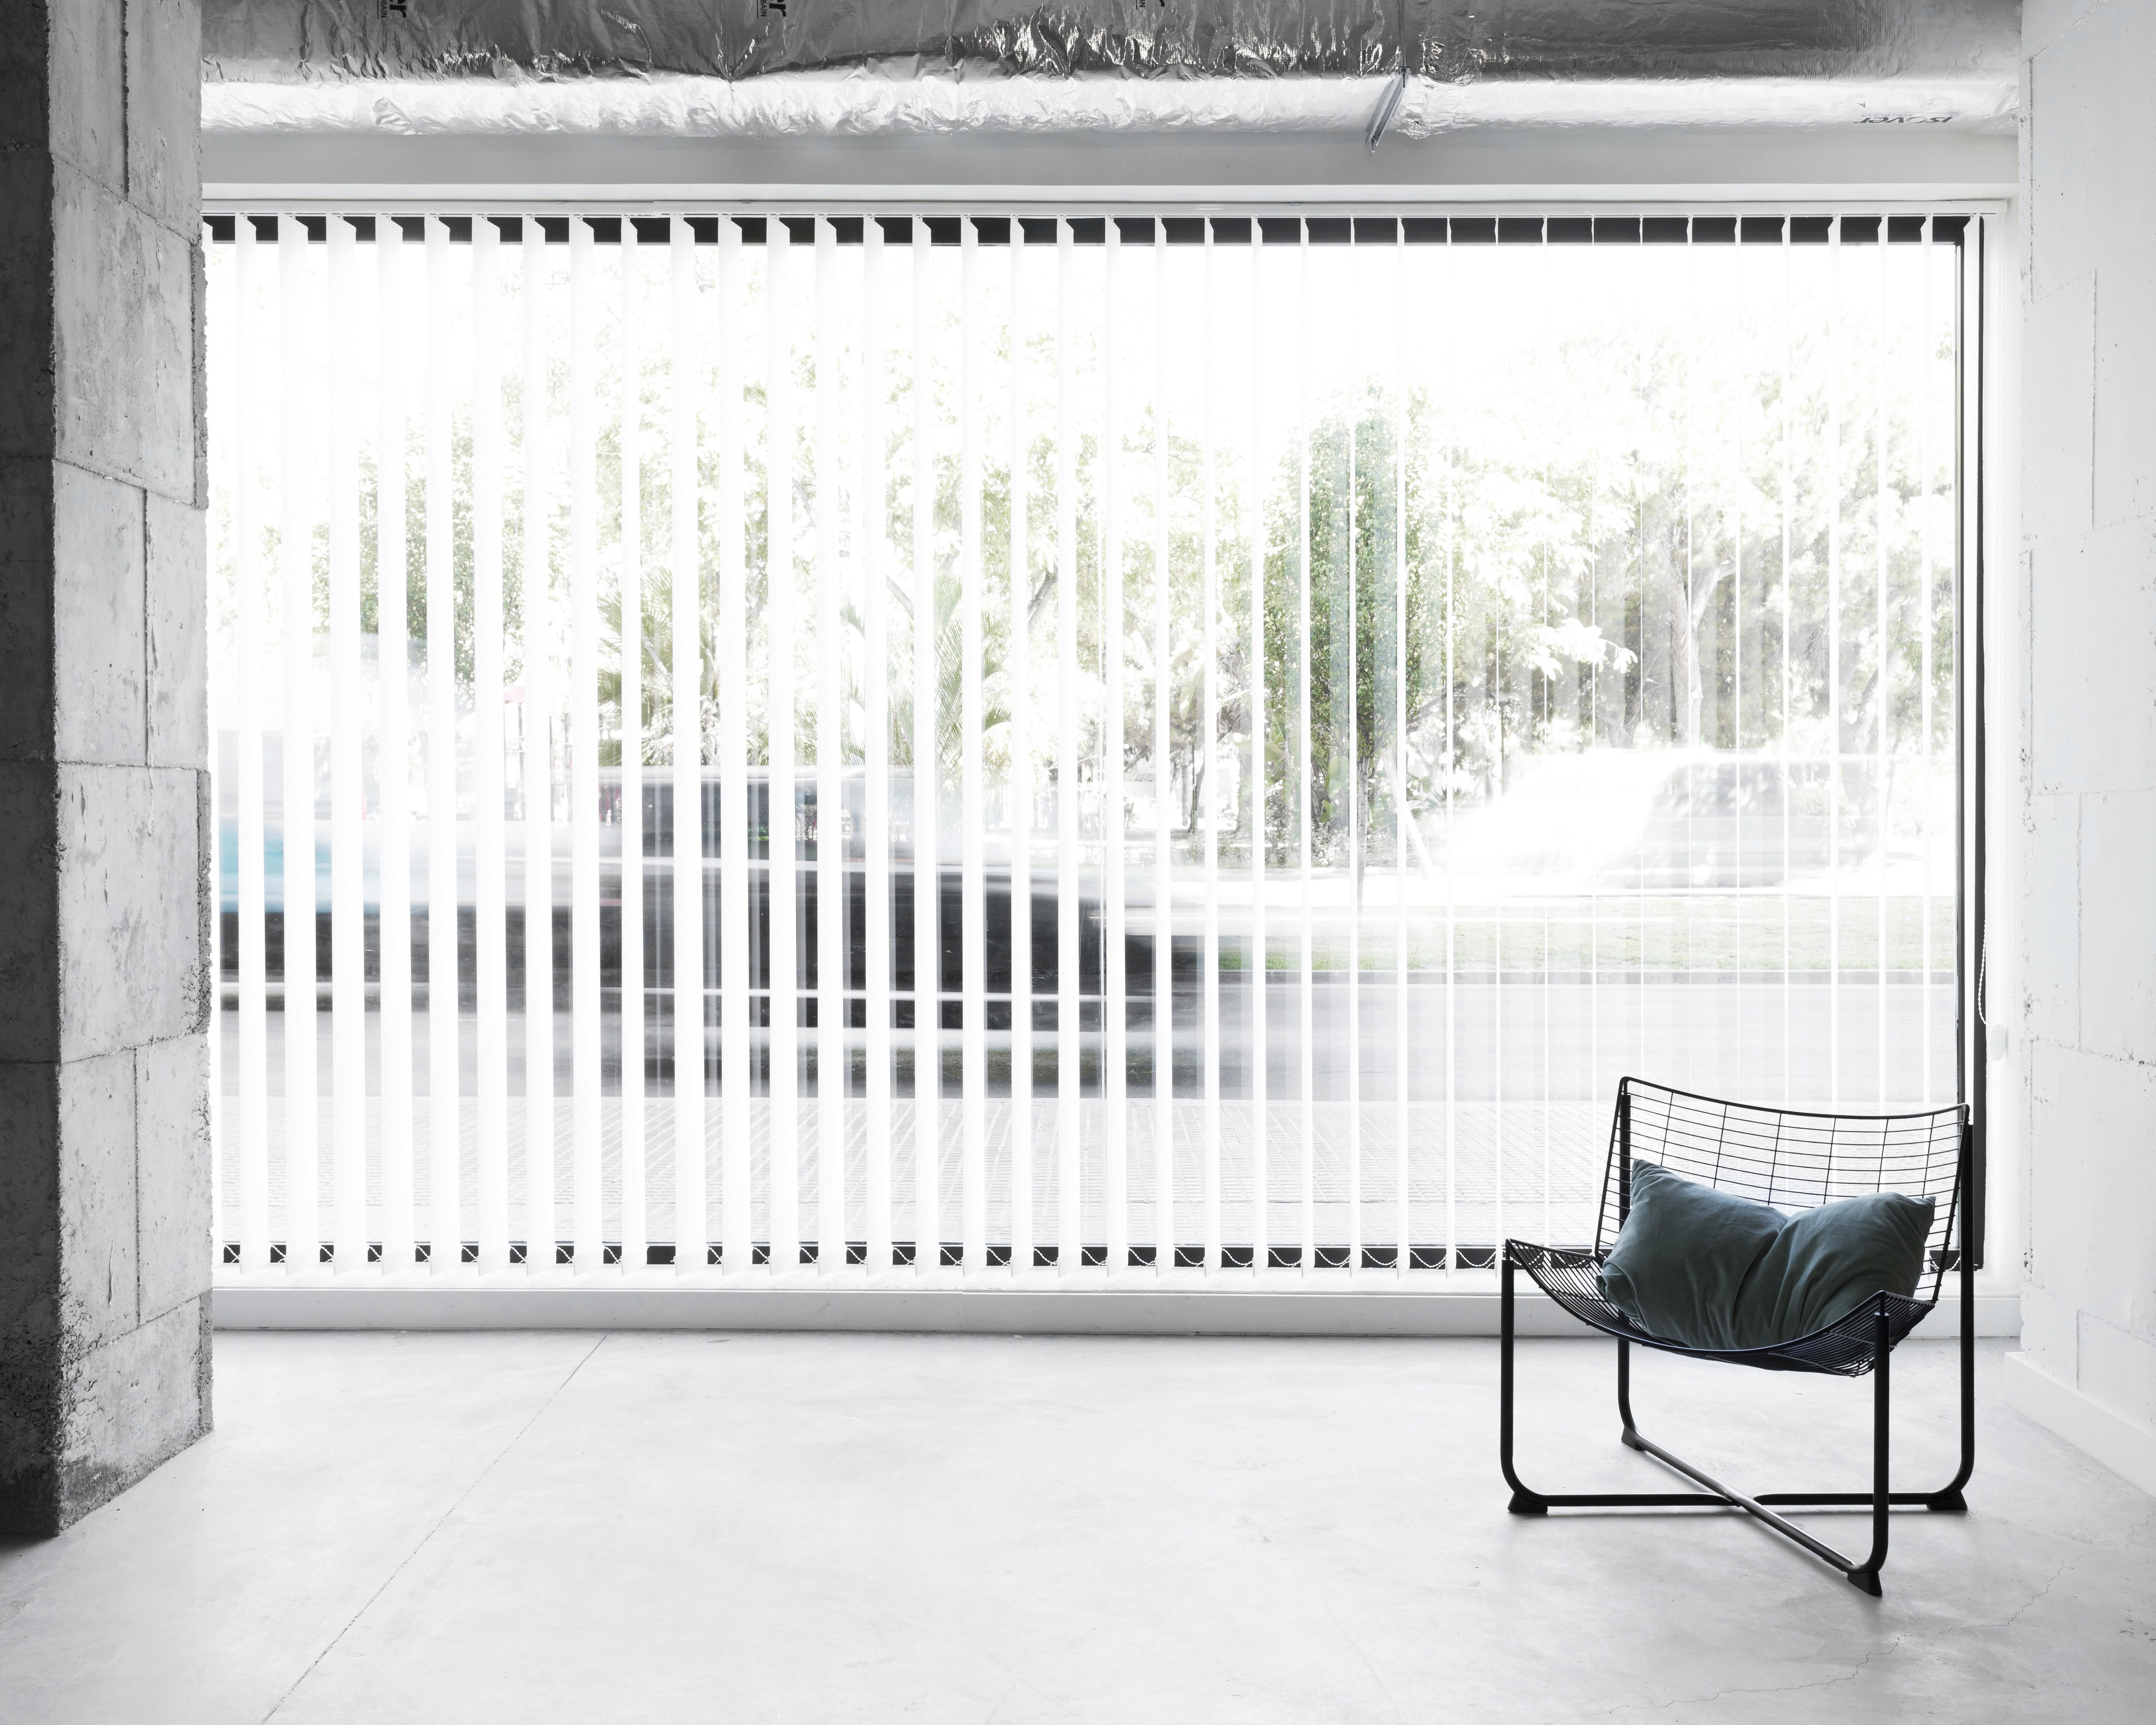 Blinds are more than just a window covering